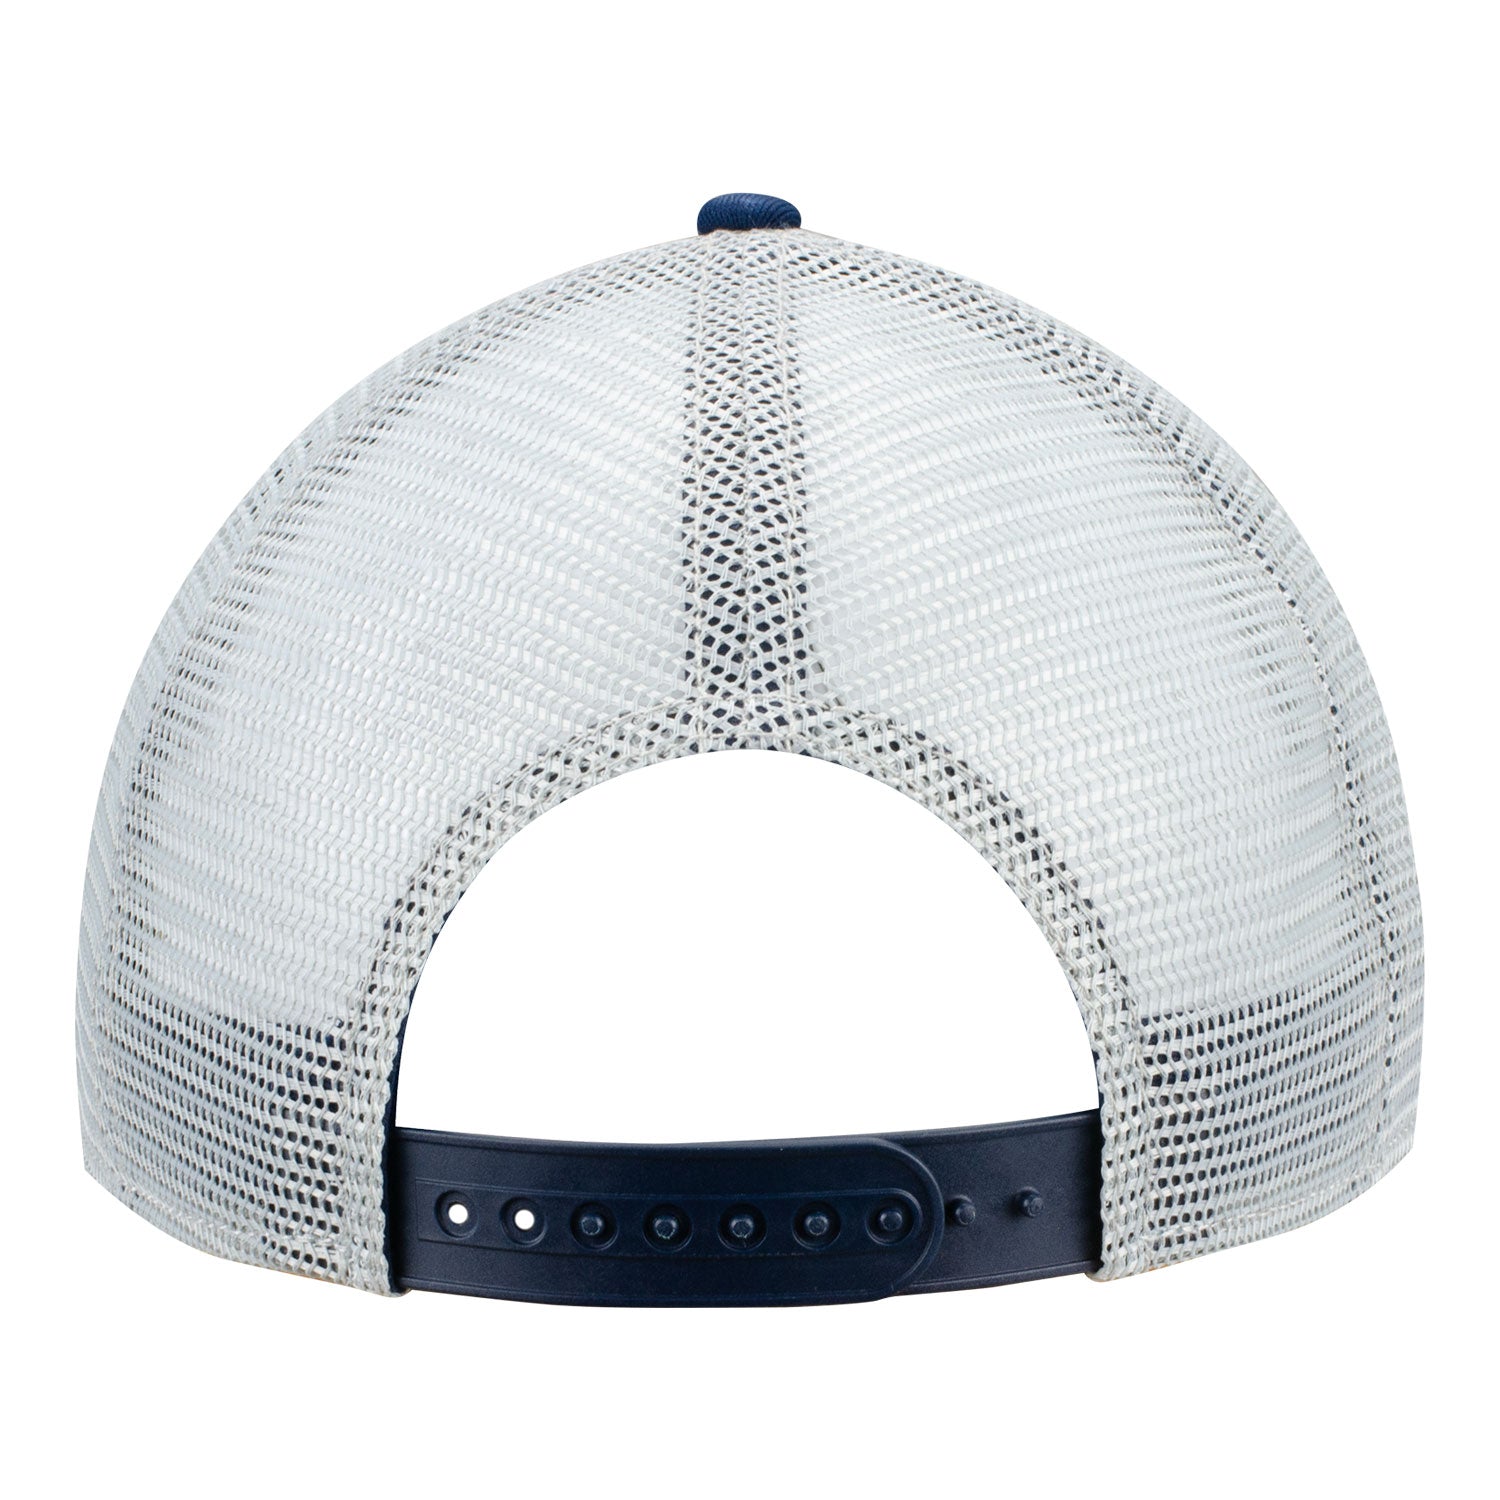 NFR 2023 Event Frayed Bill Mesh Hat in Blue and White - Back View